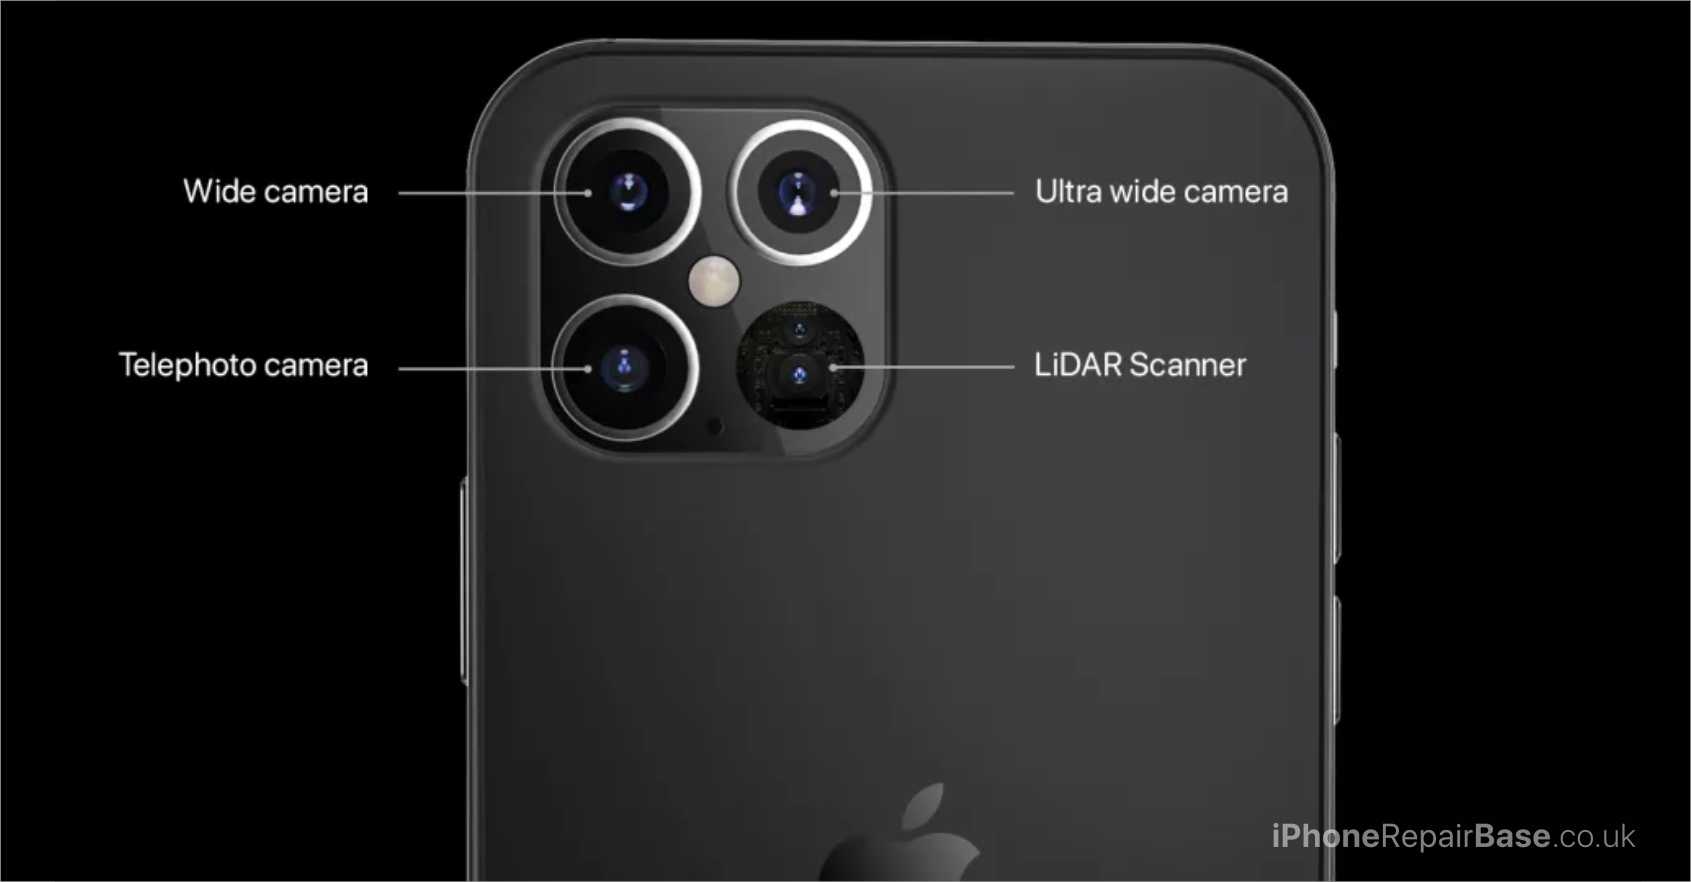 Fixing cracked, scratched camera lens on an iphone 7 plus, 8 plus, X, Xr ,11, 12, 13. Front, back camera replacement in 10 minutes. Camera repair near me.